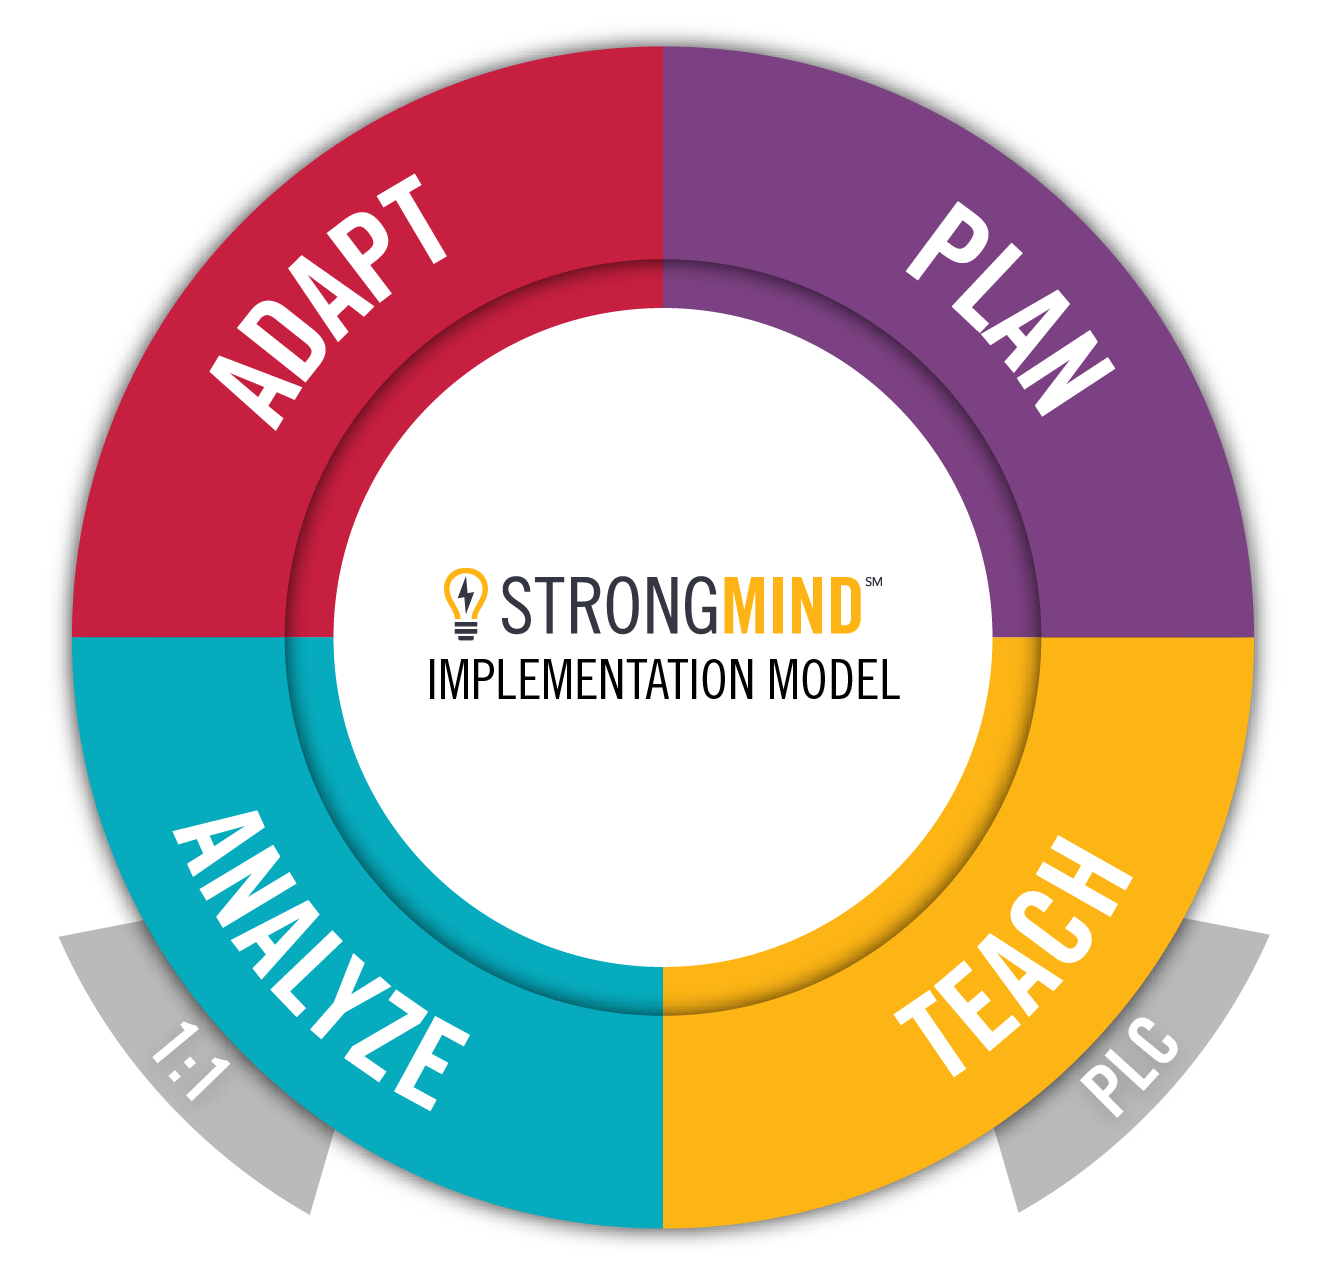 Graphic showing StrongMind implementation model: Adapt, Plan, Teach, & Analyze are the four main components, with PLC as a subset of "teach" and "1:1" as a subset of Analyze